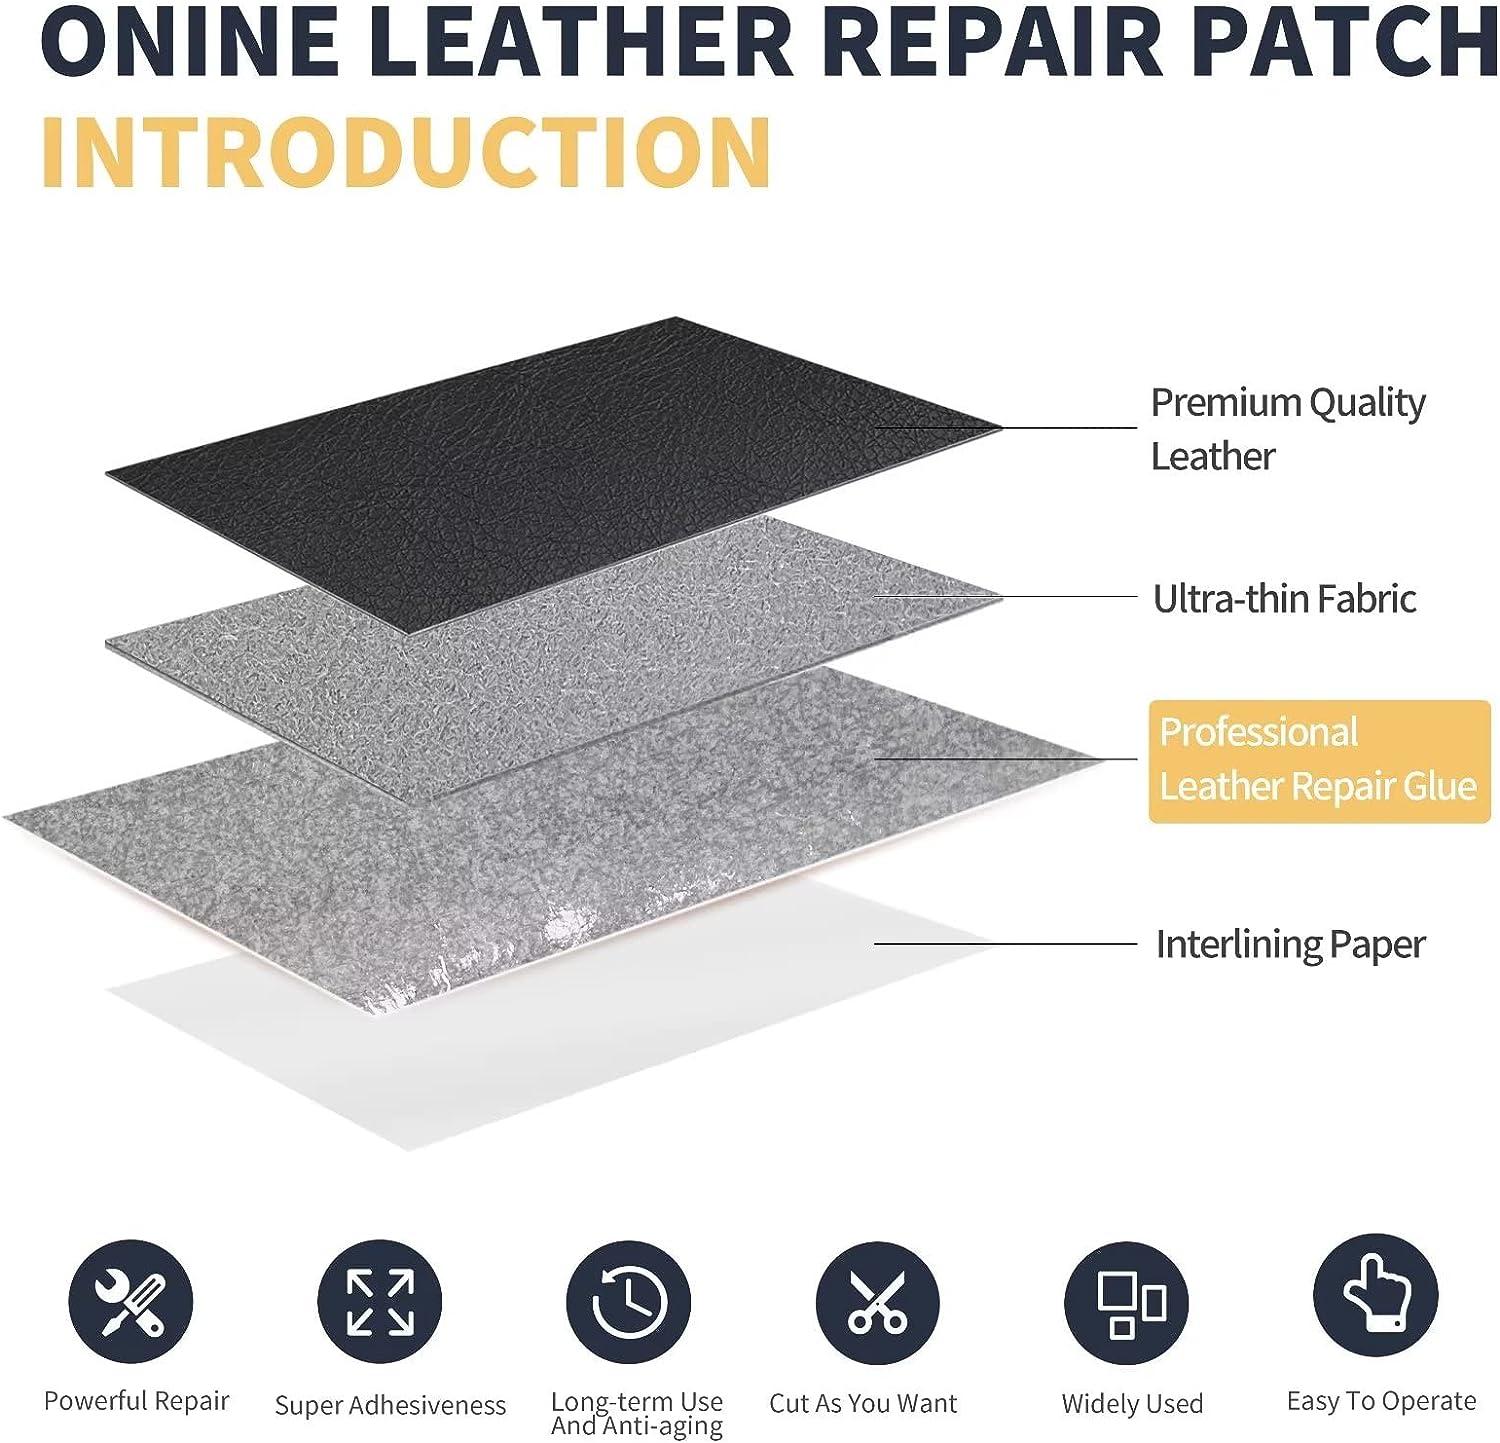 Large Leather Repair Patch for Upholstery Couch Car Seat